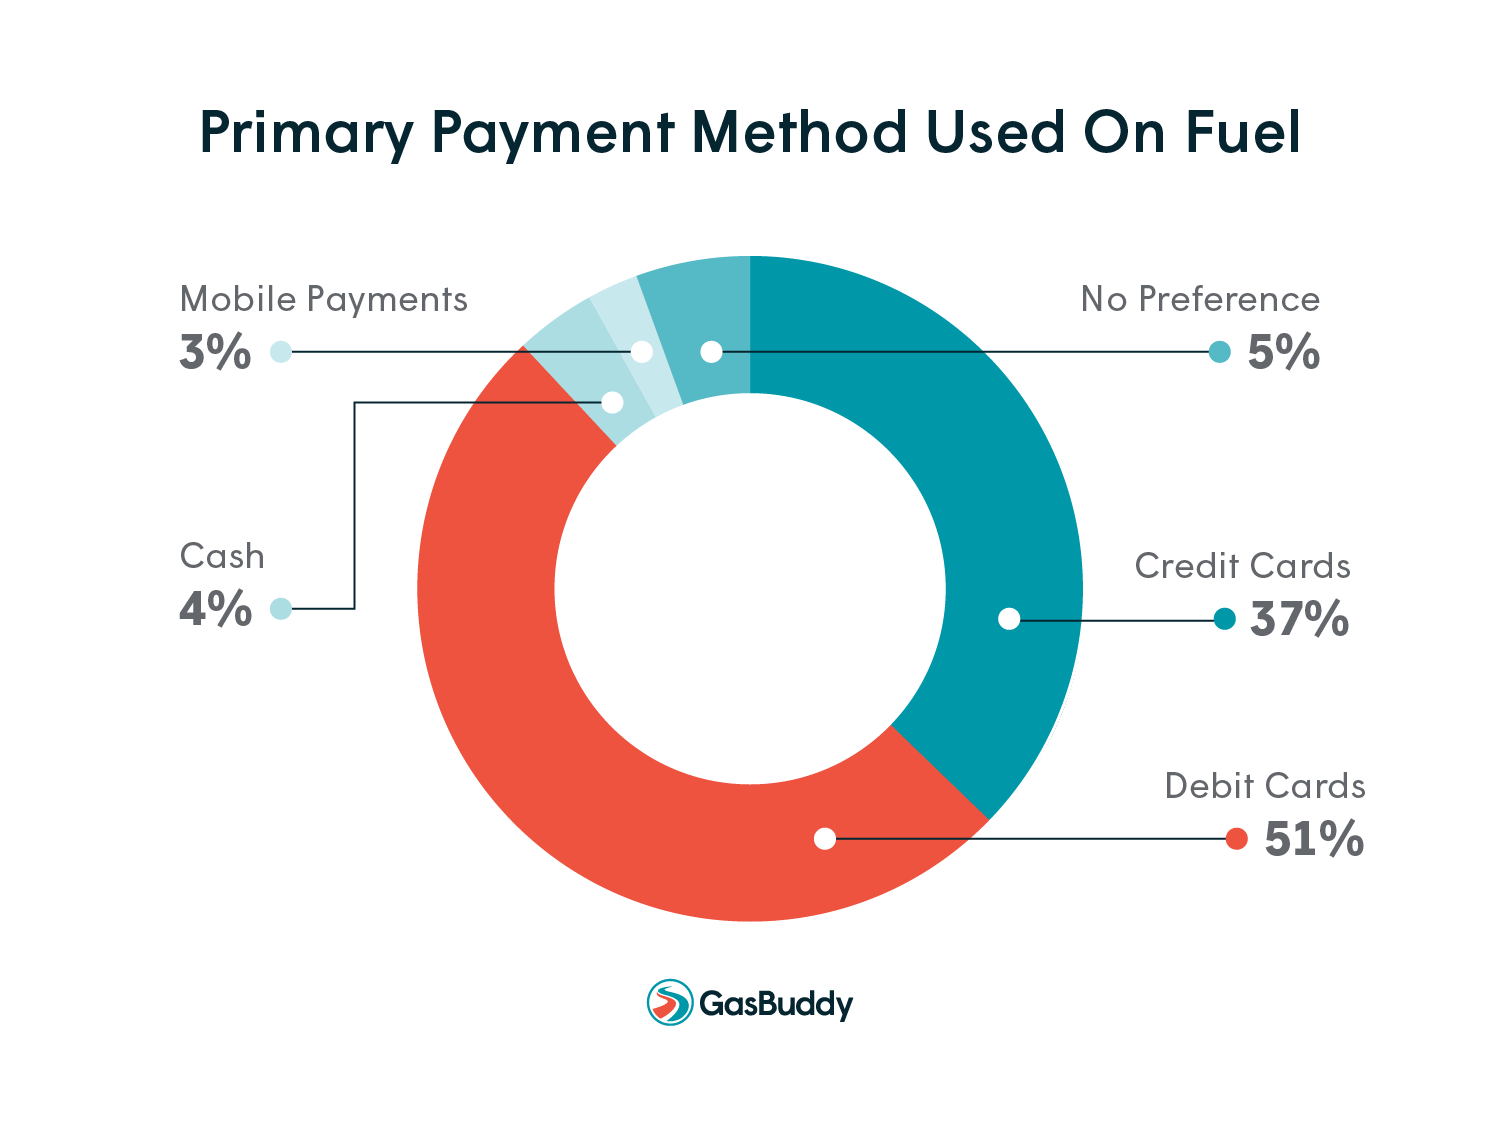 Primary Payment Method for Fuel Purchases